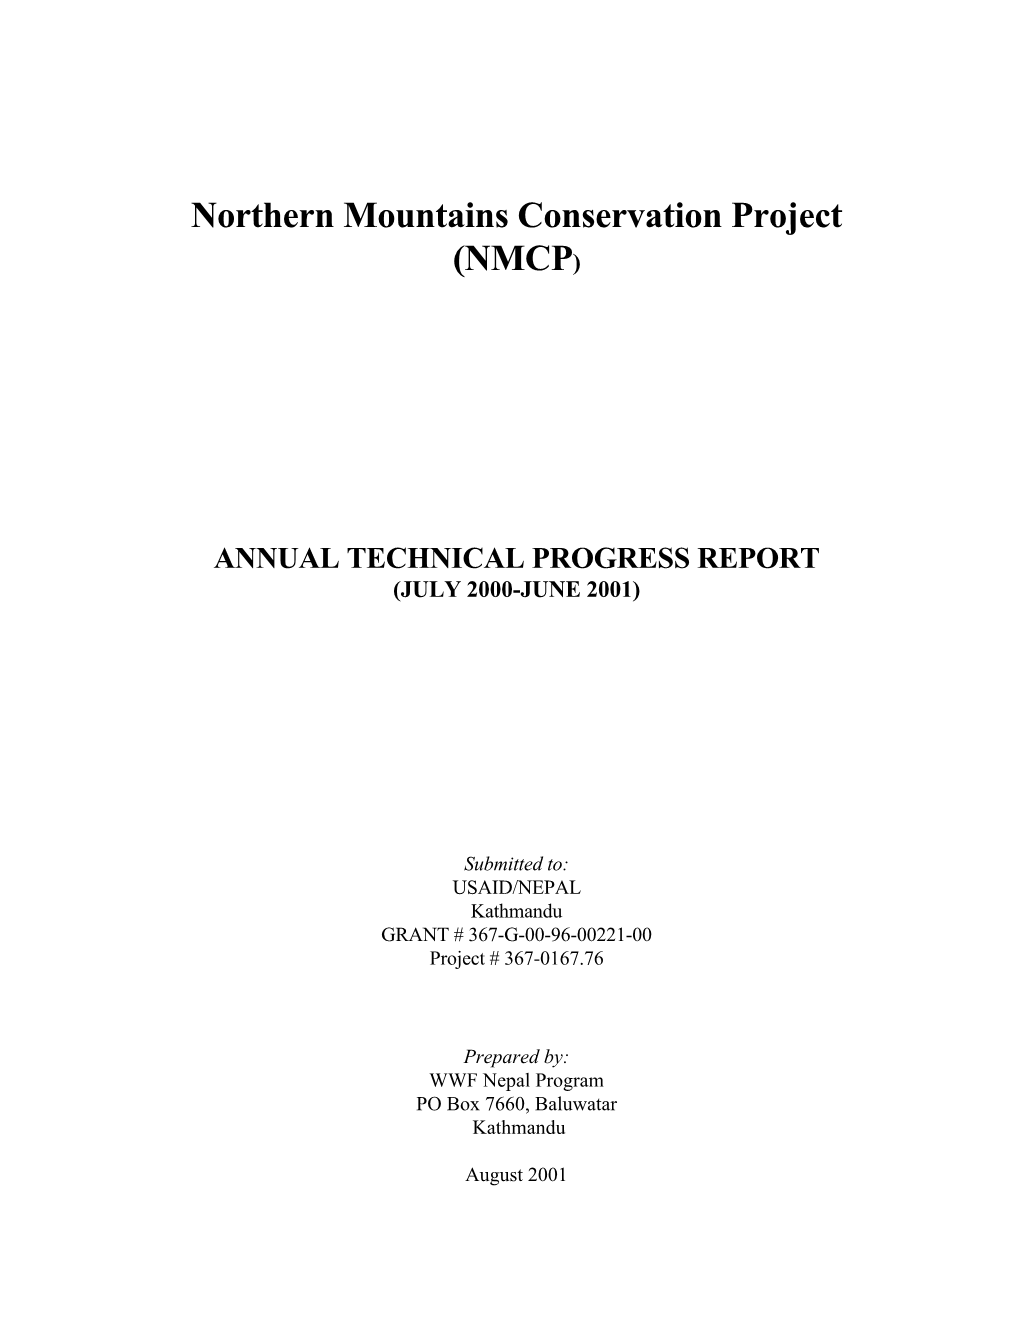 Northern Mountains Conservation Project (NMCP)